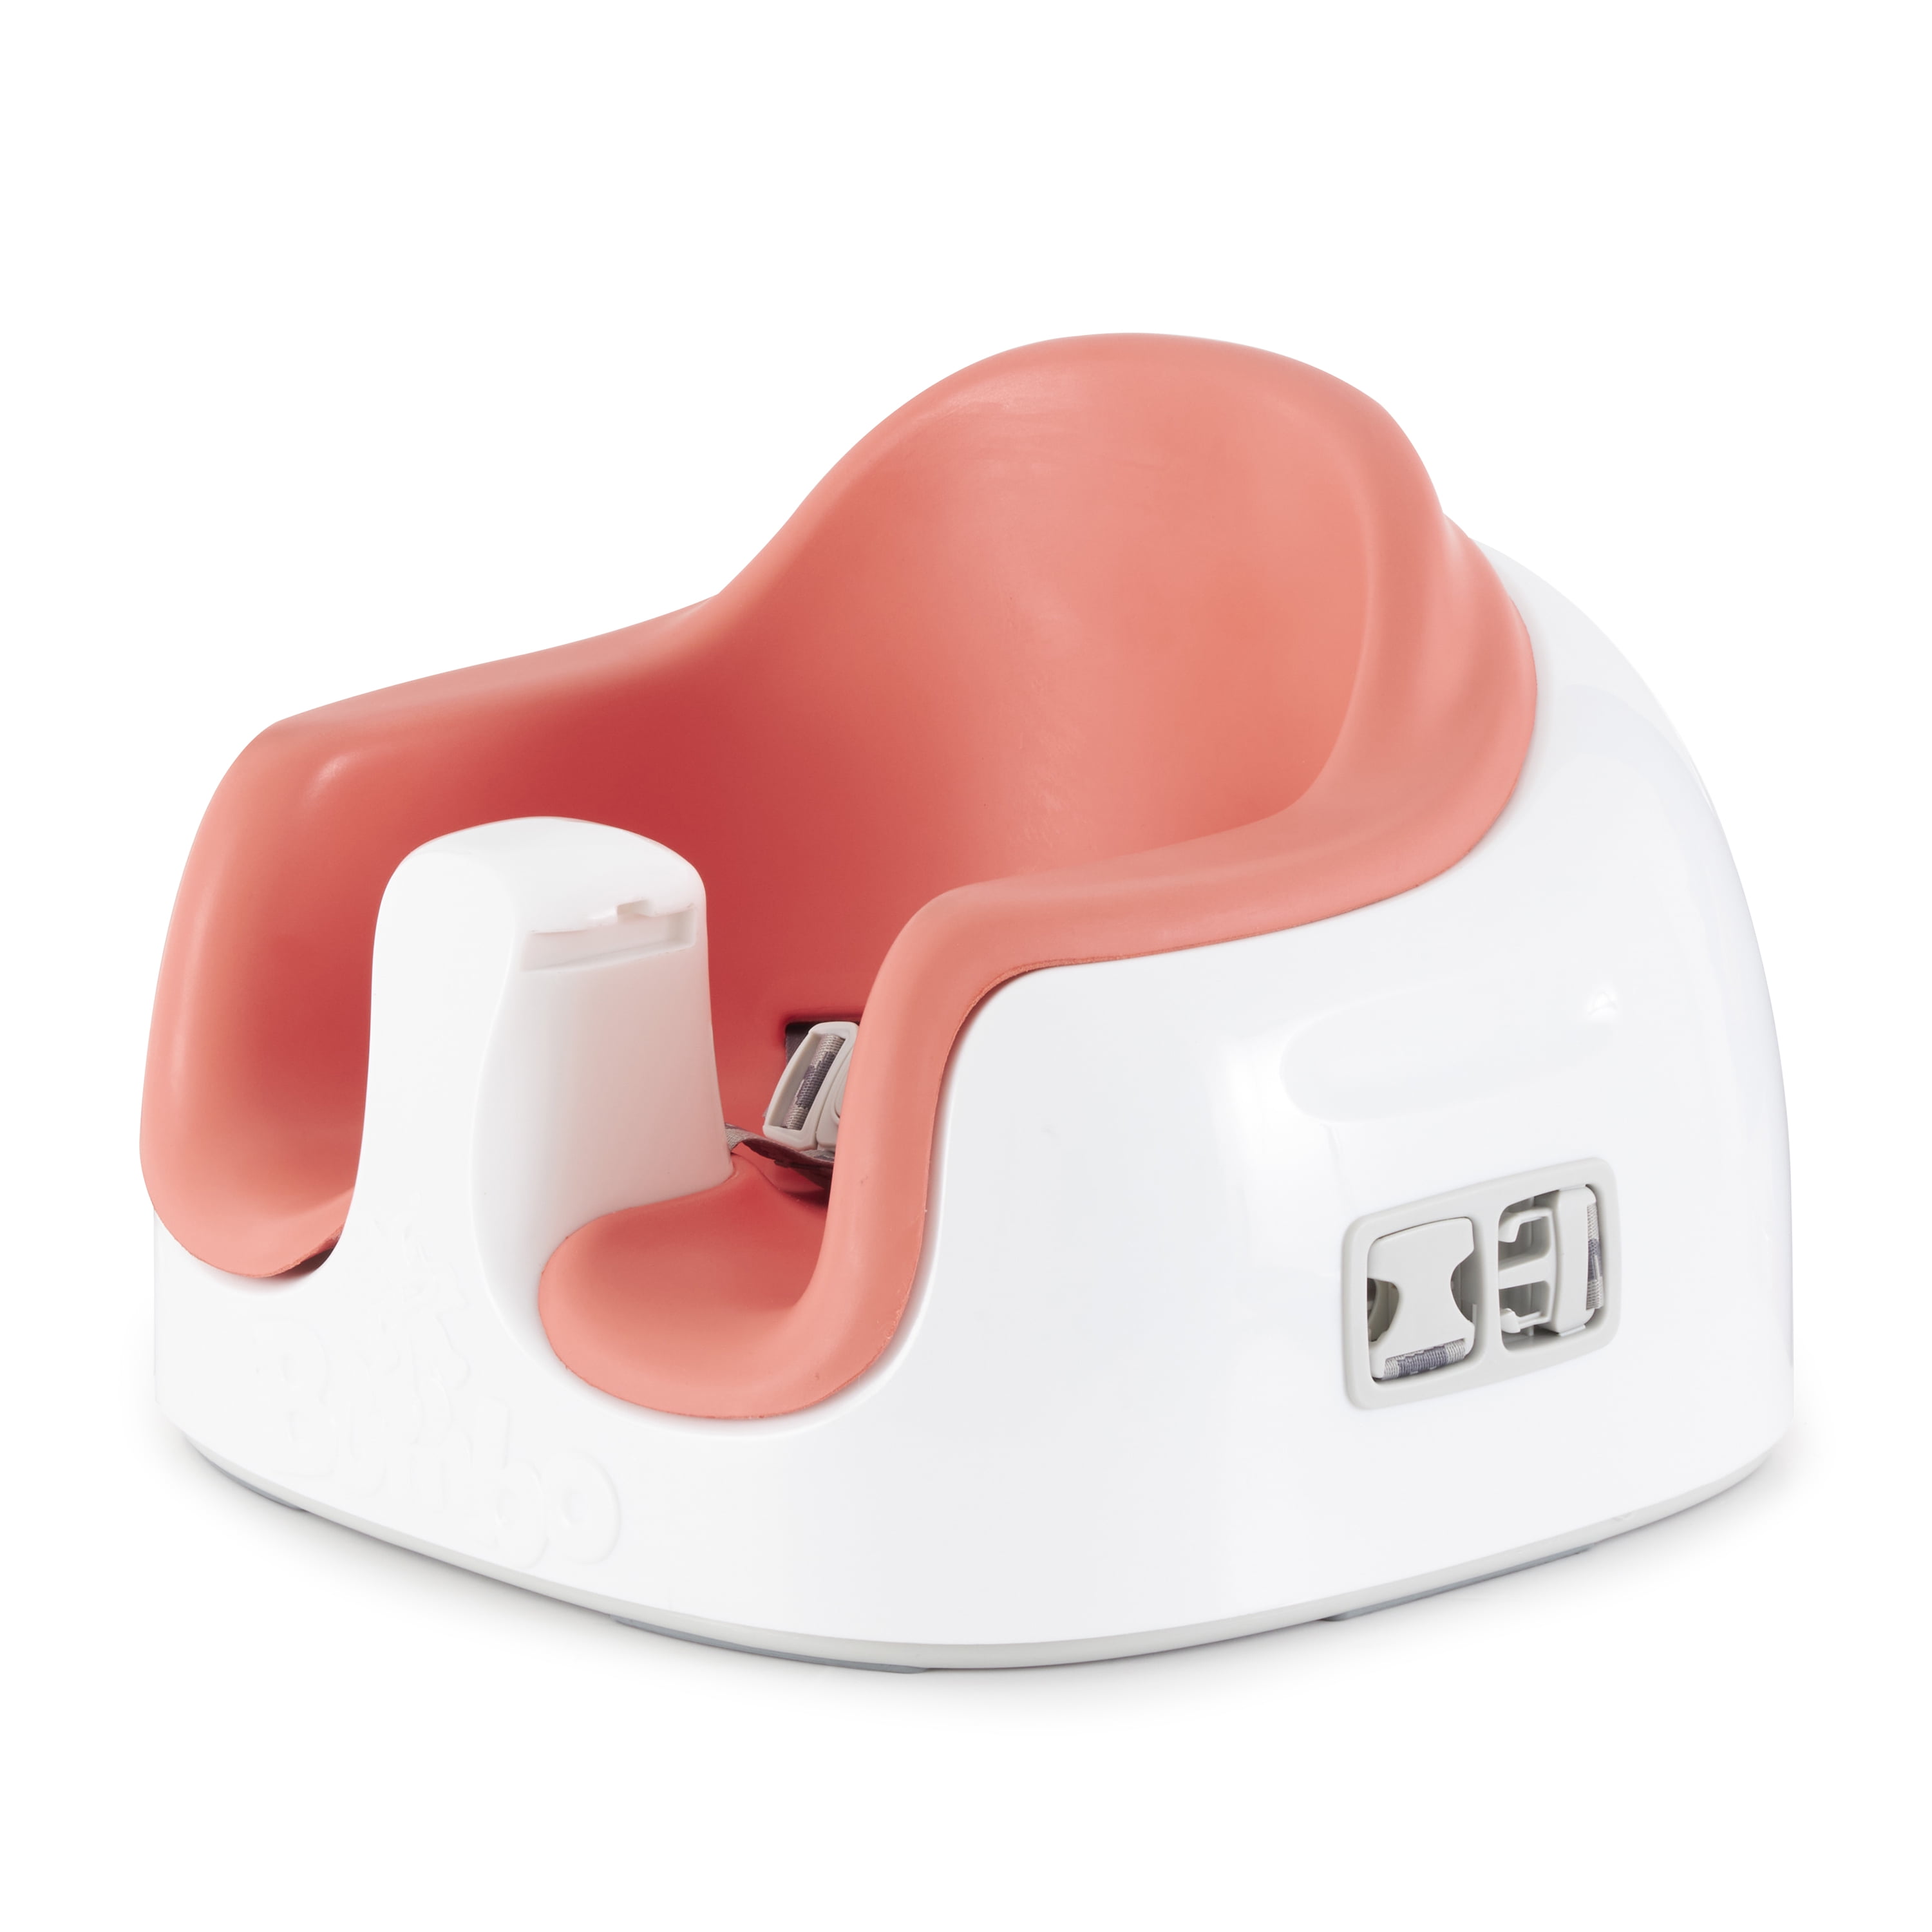 Bumbo Baby Toddler Soft Foam Multi Seat Tray and Buckle Straps, Coral - Walmart.com